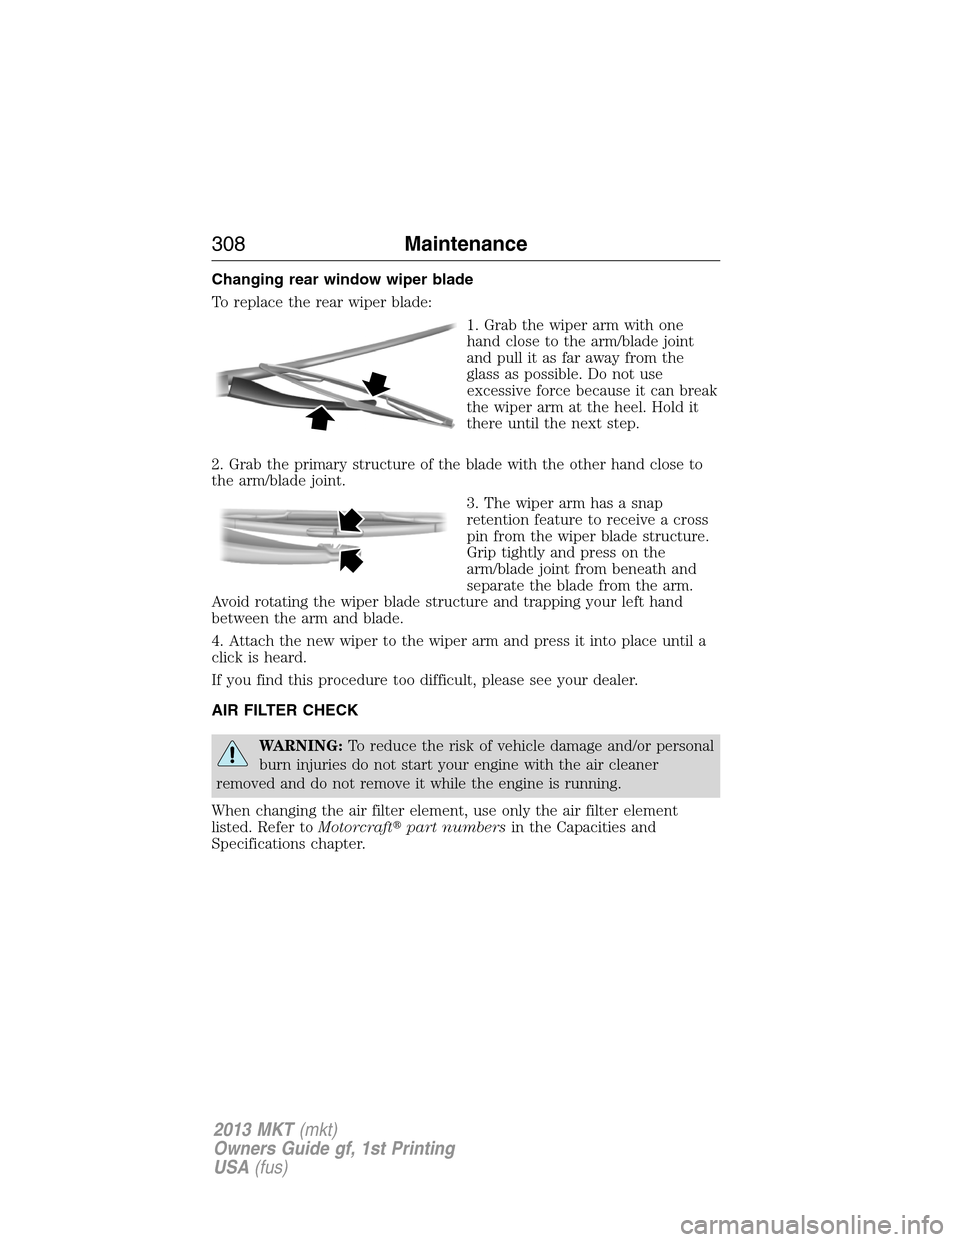 LINCOLN MKT 2013 Service Manual Changing rear window wiper blade
To replace the rear wiper blade:
1. Grab the wiper arm with one
hand close to the arm/blade joint
and pull it as far away from the
glass as possible. Do not use
excess